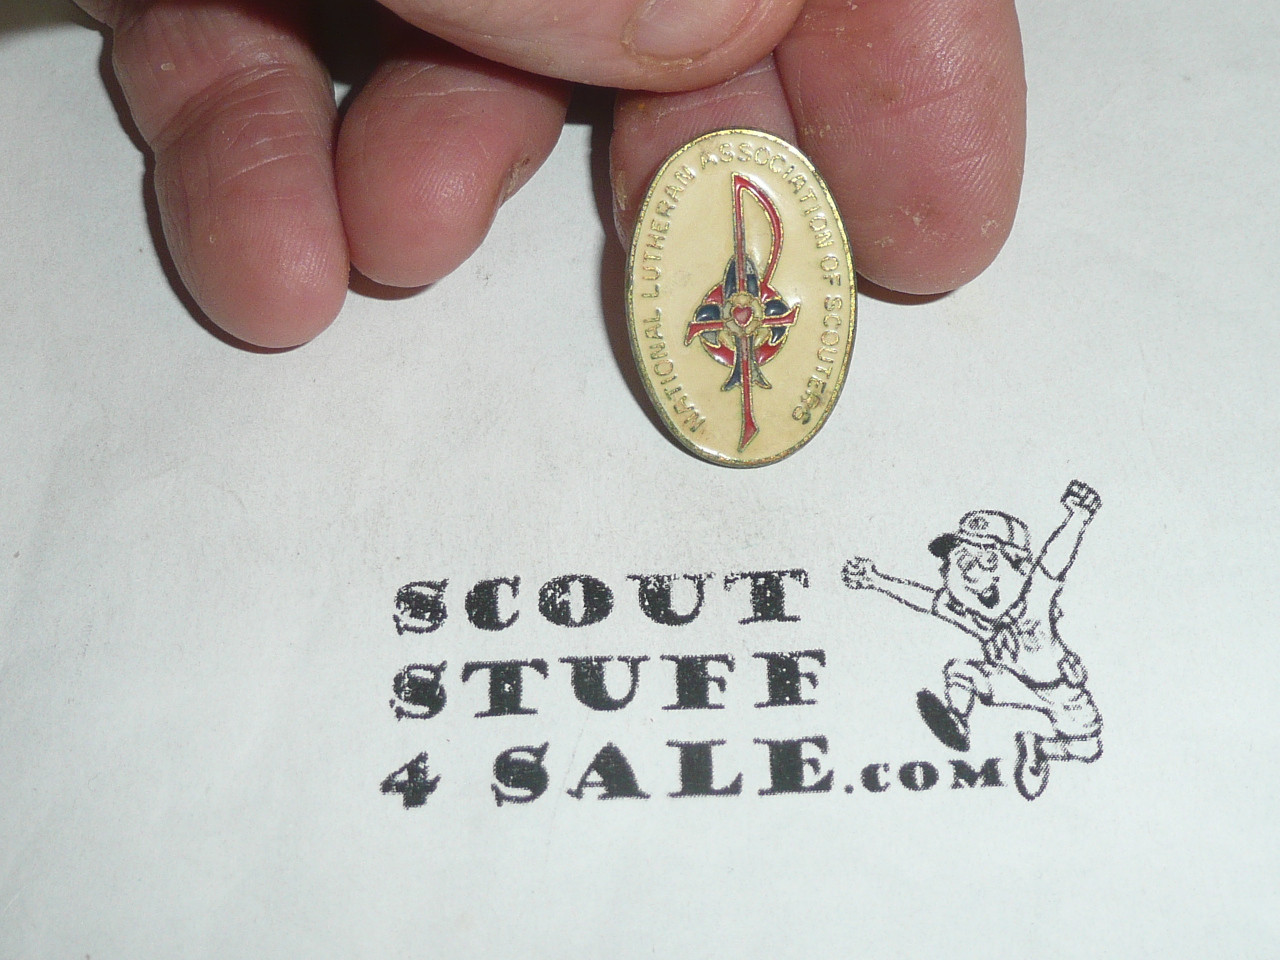 Early National Lutheran Association of Scouters Pin